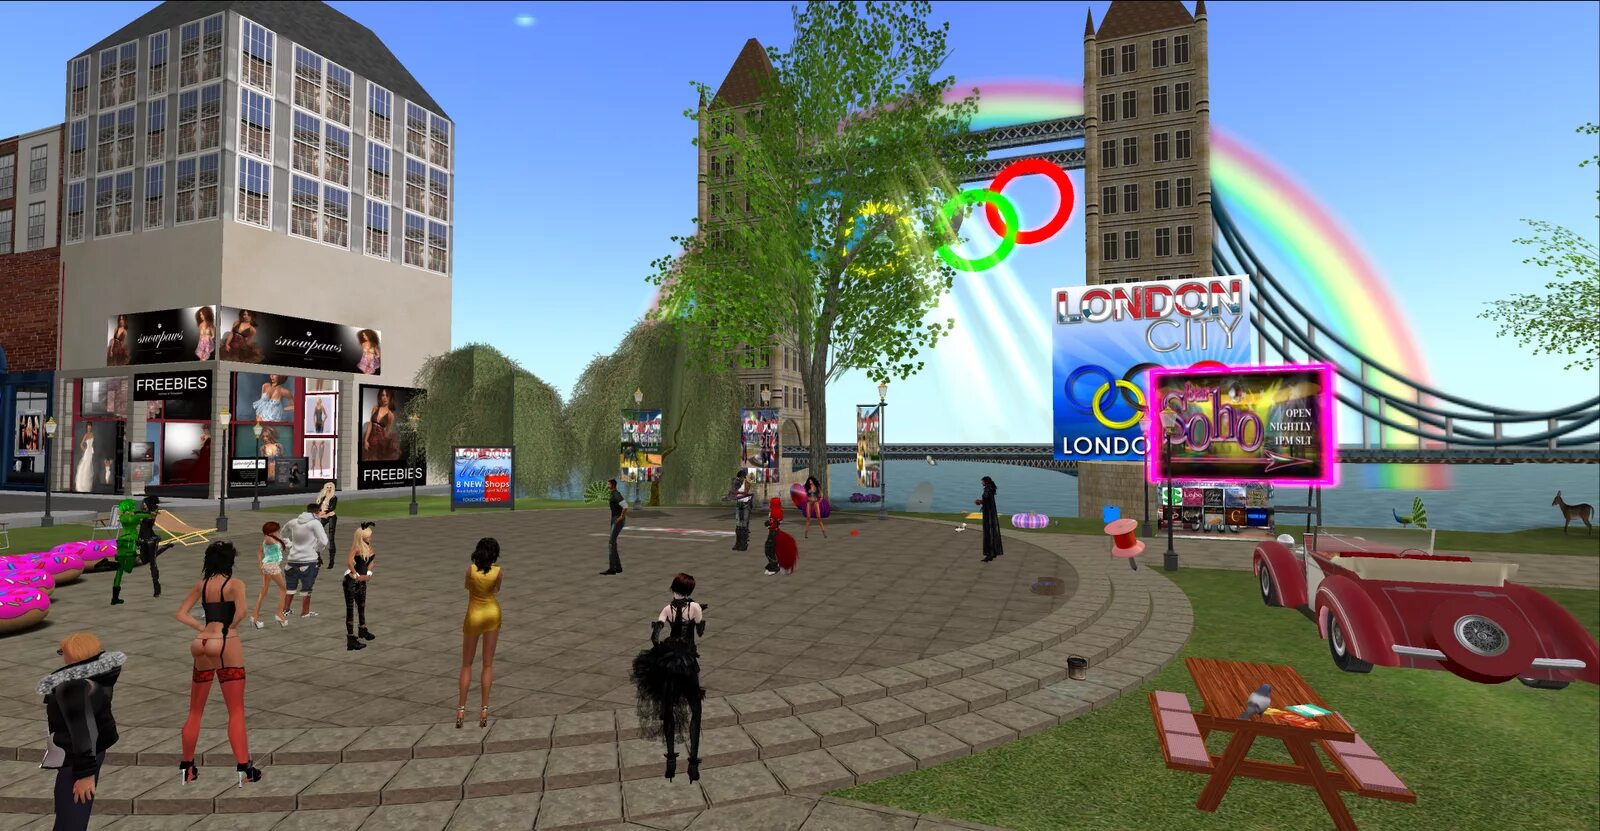 Second life worlds